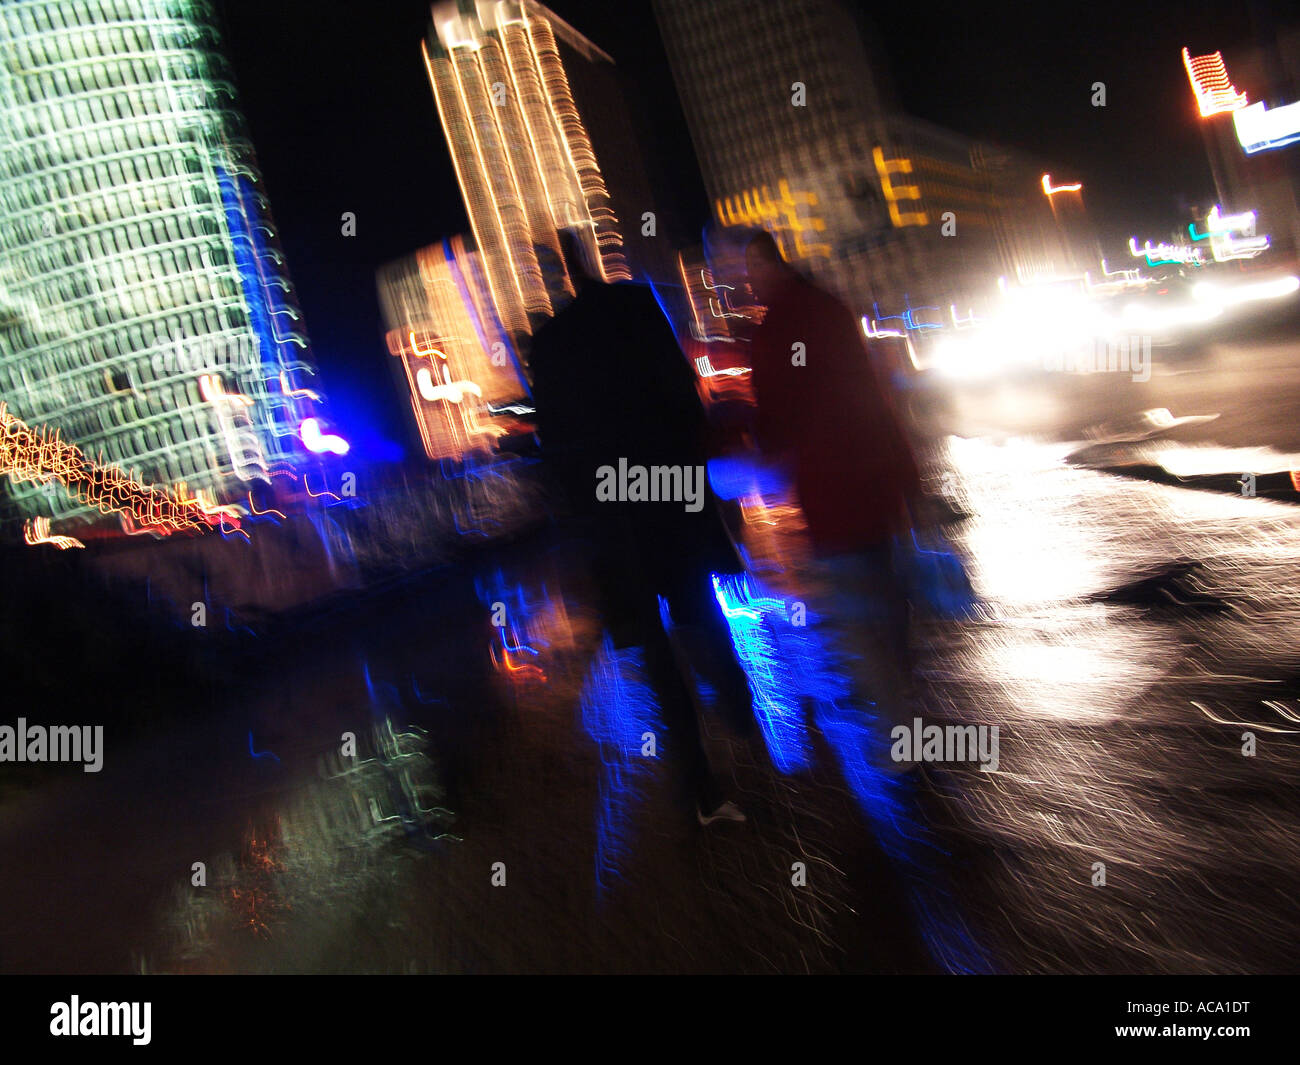 People at night at the Potsdamer square, Berlin, Germany Stock Photo